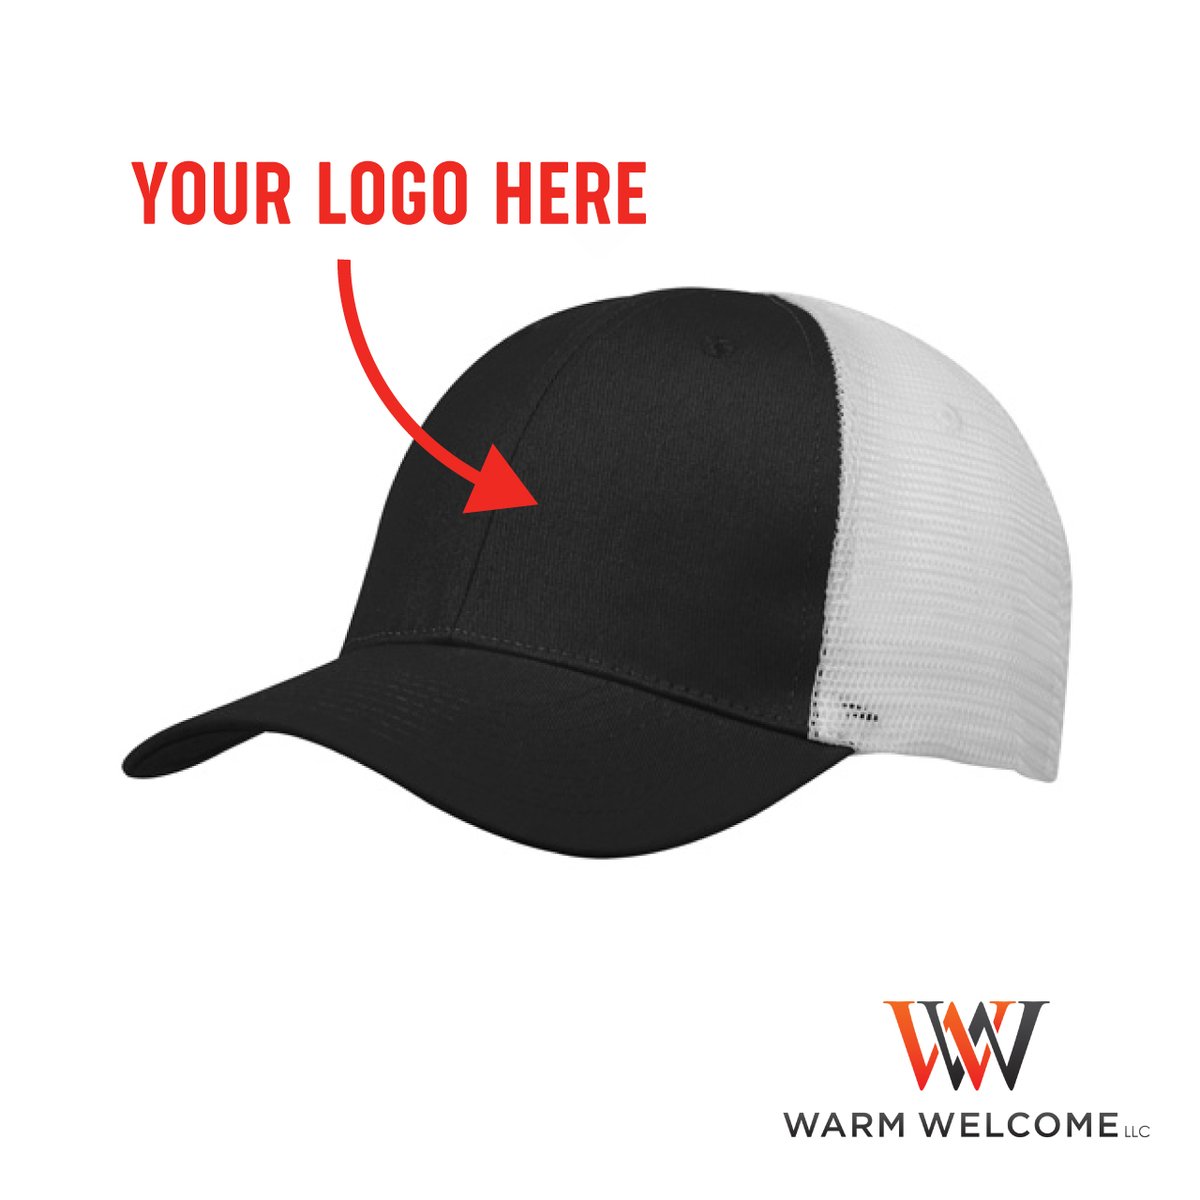 Looking to spread your brand awareness? We offer well-built products custom to YOUR business!

#promoswag
#customizedproducts
#brandawareness
#corporategifts
#promotionalgiveaways